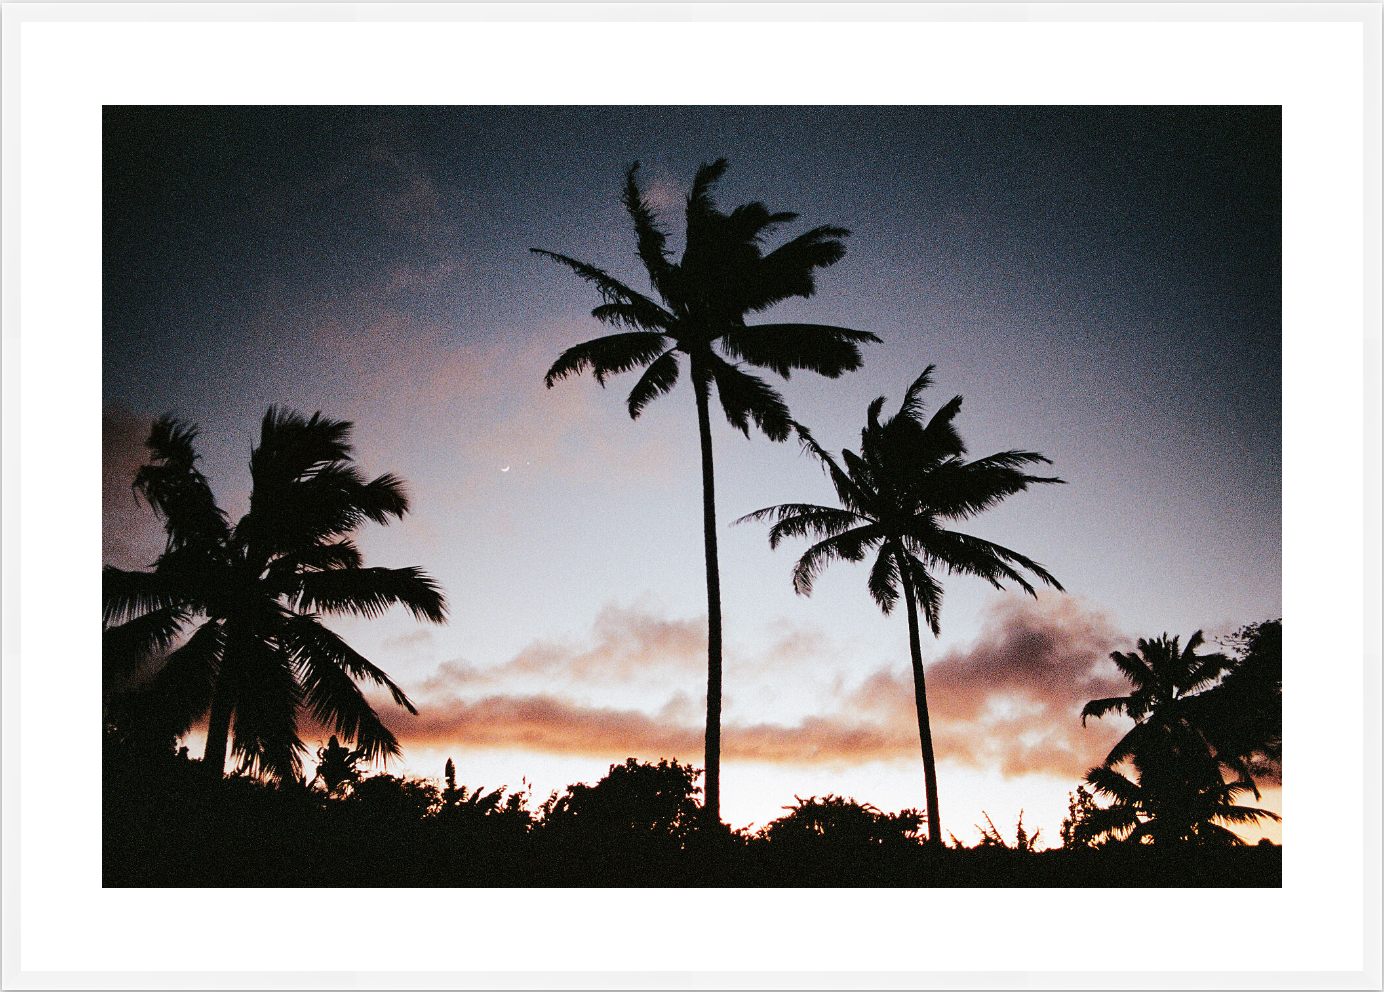 Palms Against the Fading Sky